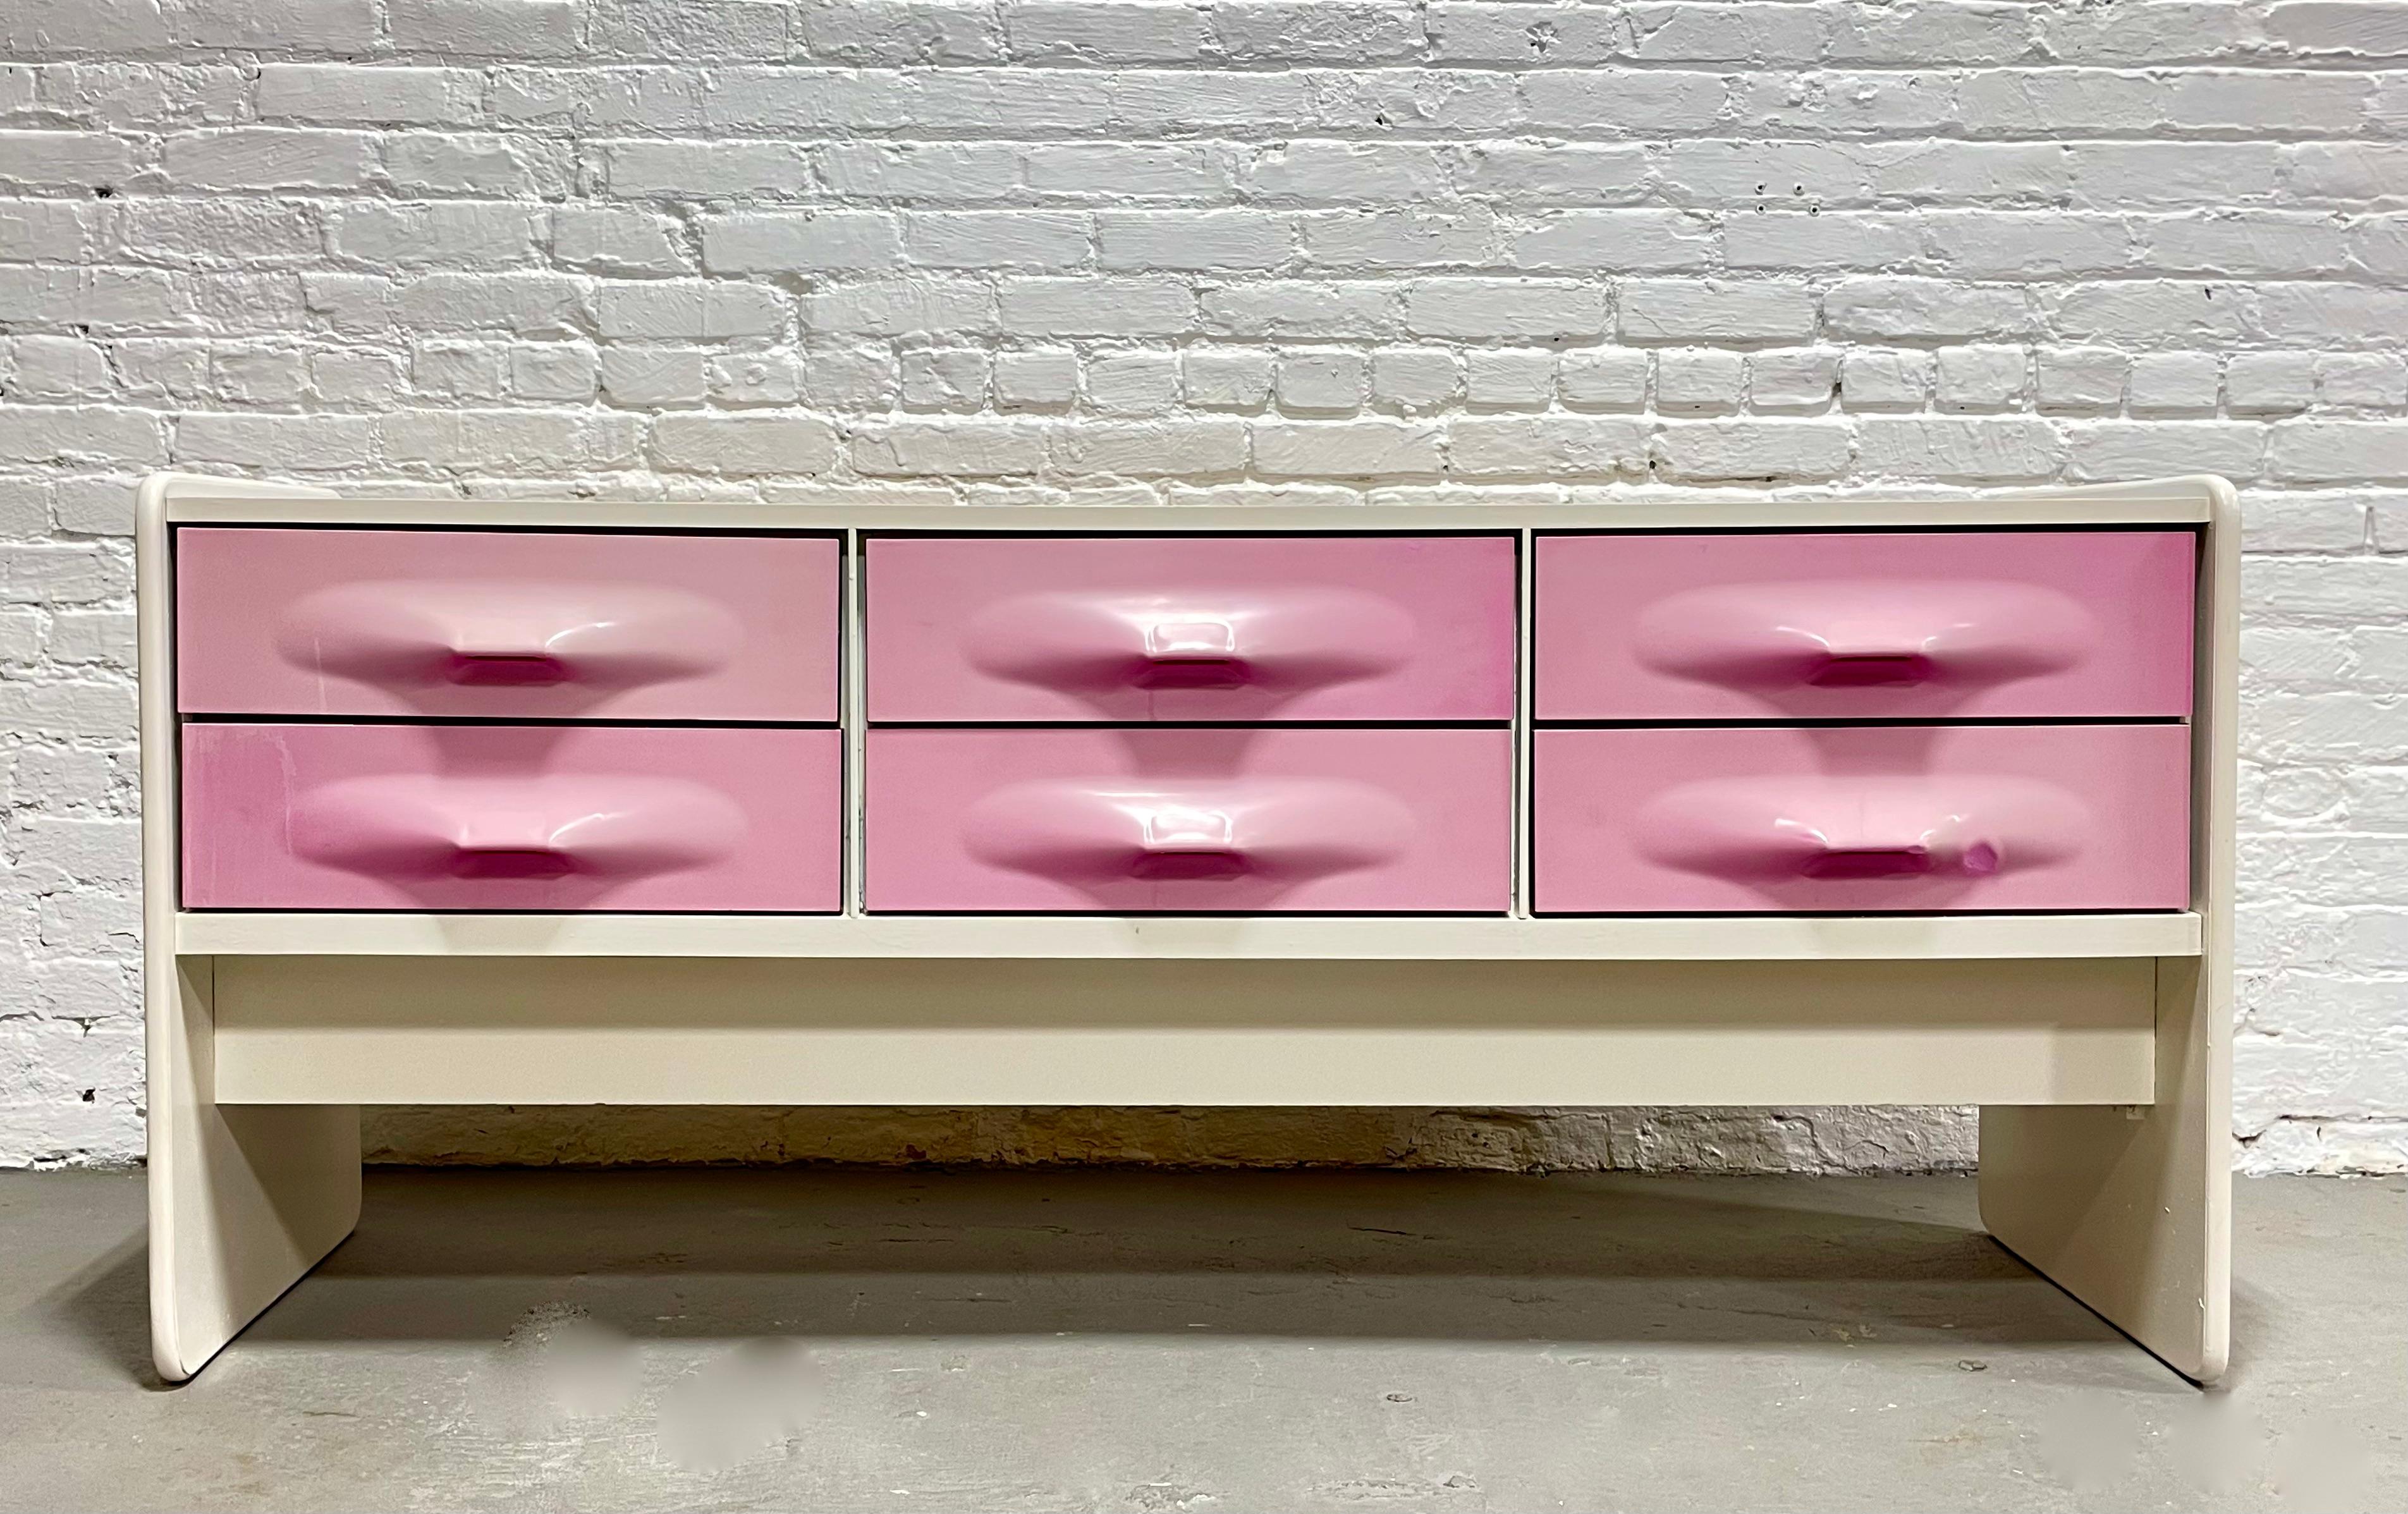 Rare Mid-Century Modern long dresser / credenza by Giovanni Maur for Treco, circa 1970, Made in Canada. This style is reminiscent of Raymond Loewy’s DF2000 series and features the less common pink ABS molded drawer fronts encased in white wood